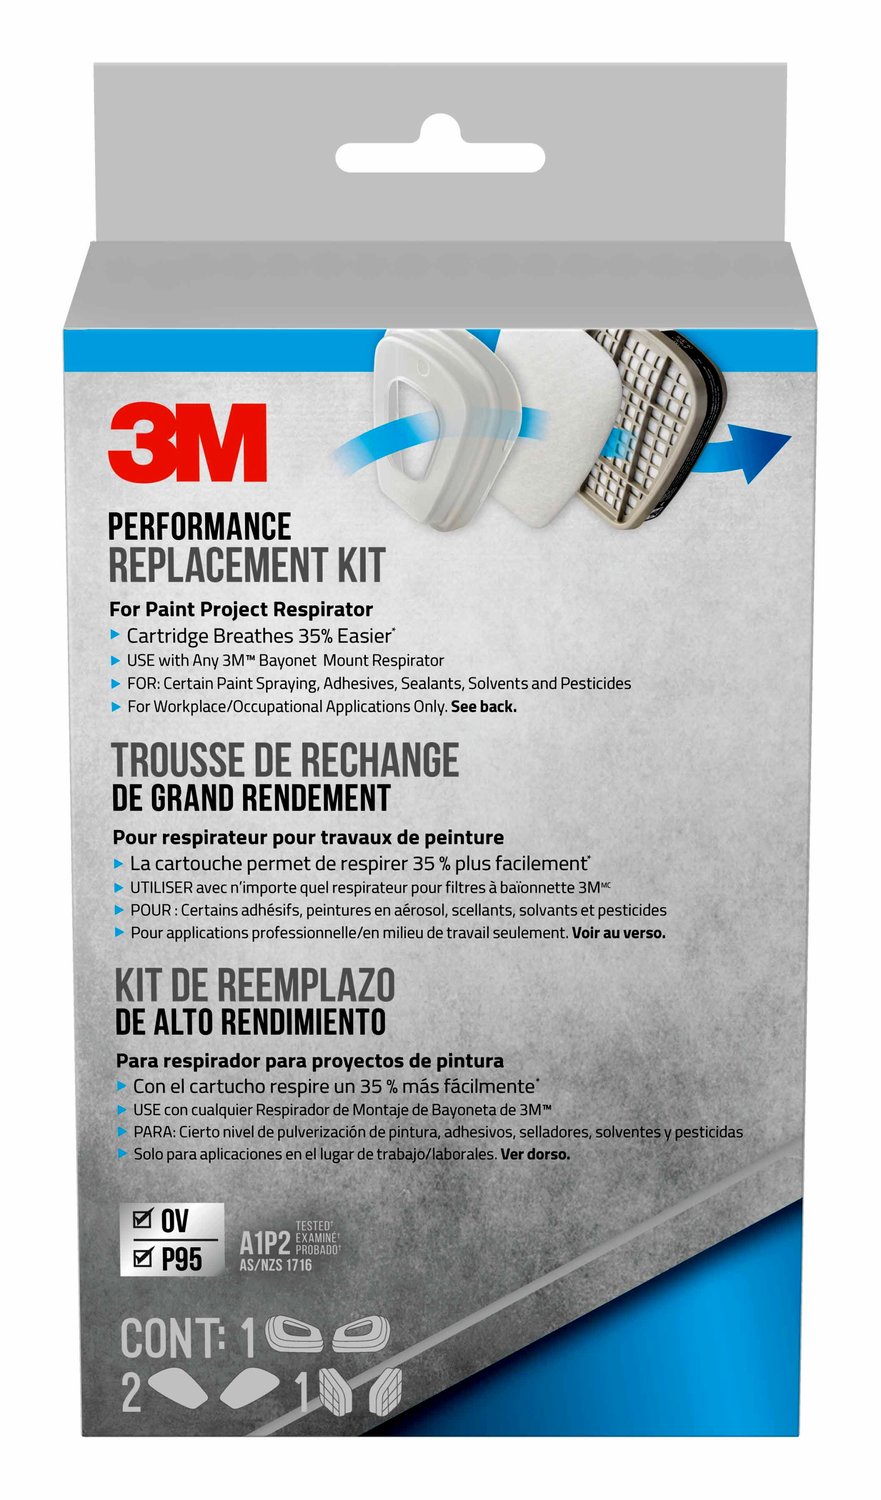 7100159397 - 3M Performance Replacement Kit for the Paint Project Respirator OV/P95,
6023P1-DC-THD, 1 kit/pack, 5 packs/case